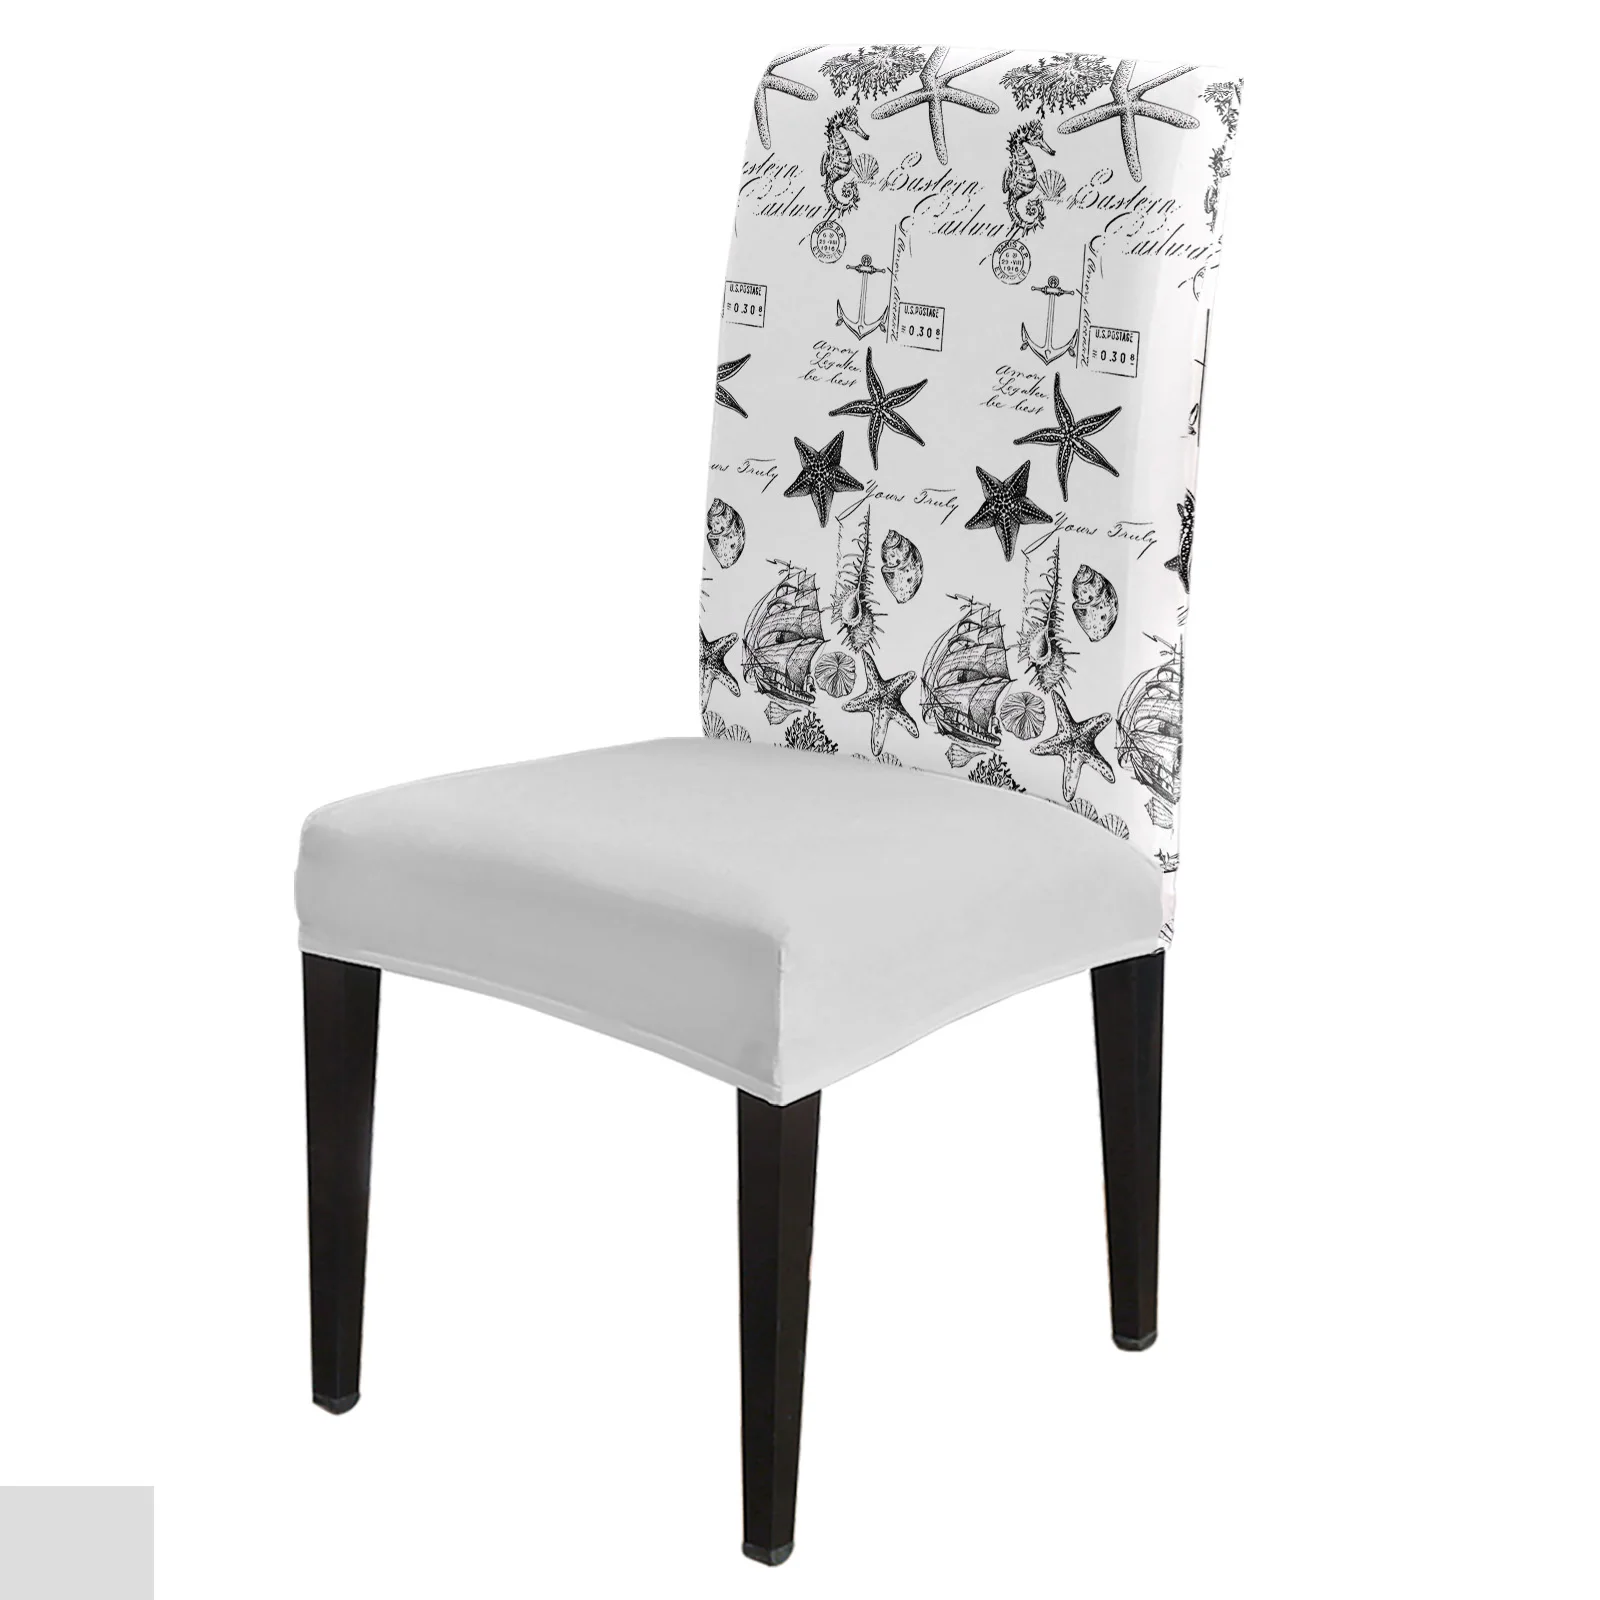 

Black Ocean Starfish Shell Coral Vessel Texture Stretch Chair Cover Kitchen Dinning Chair Seat Cover Christmas Chair Covers